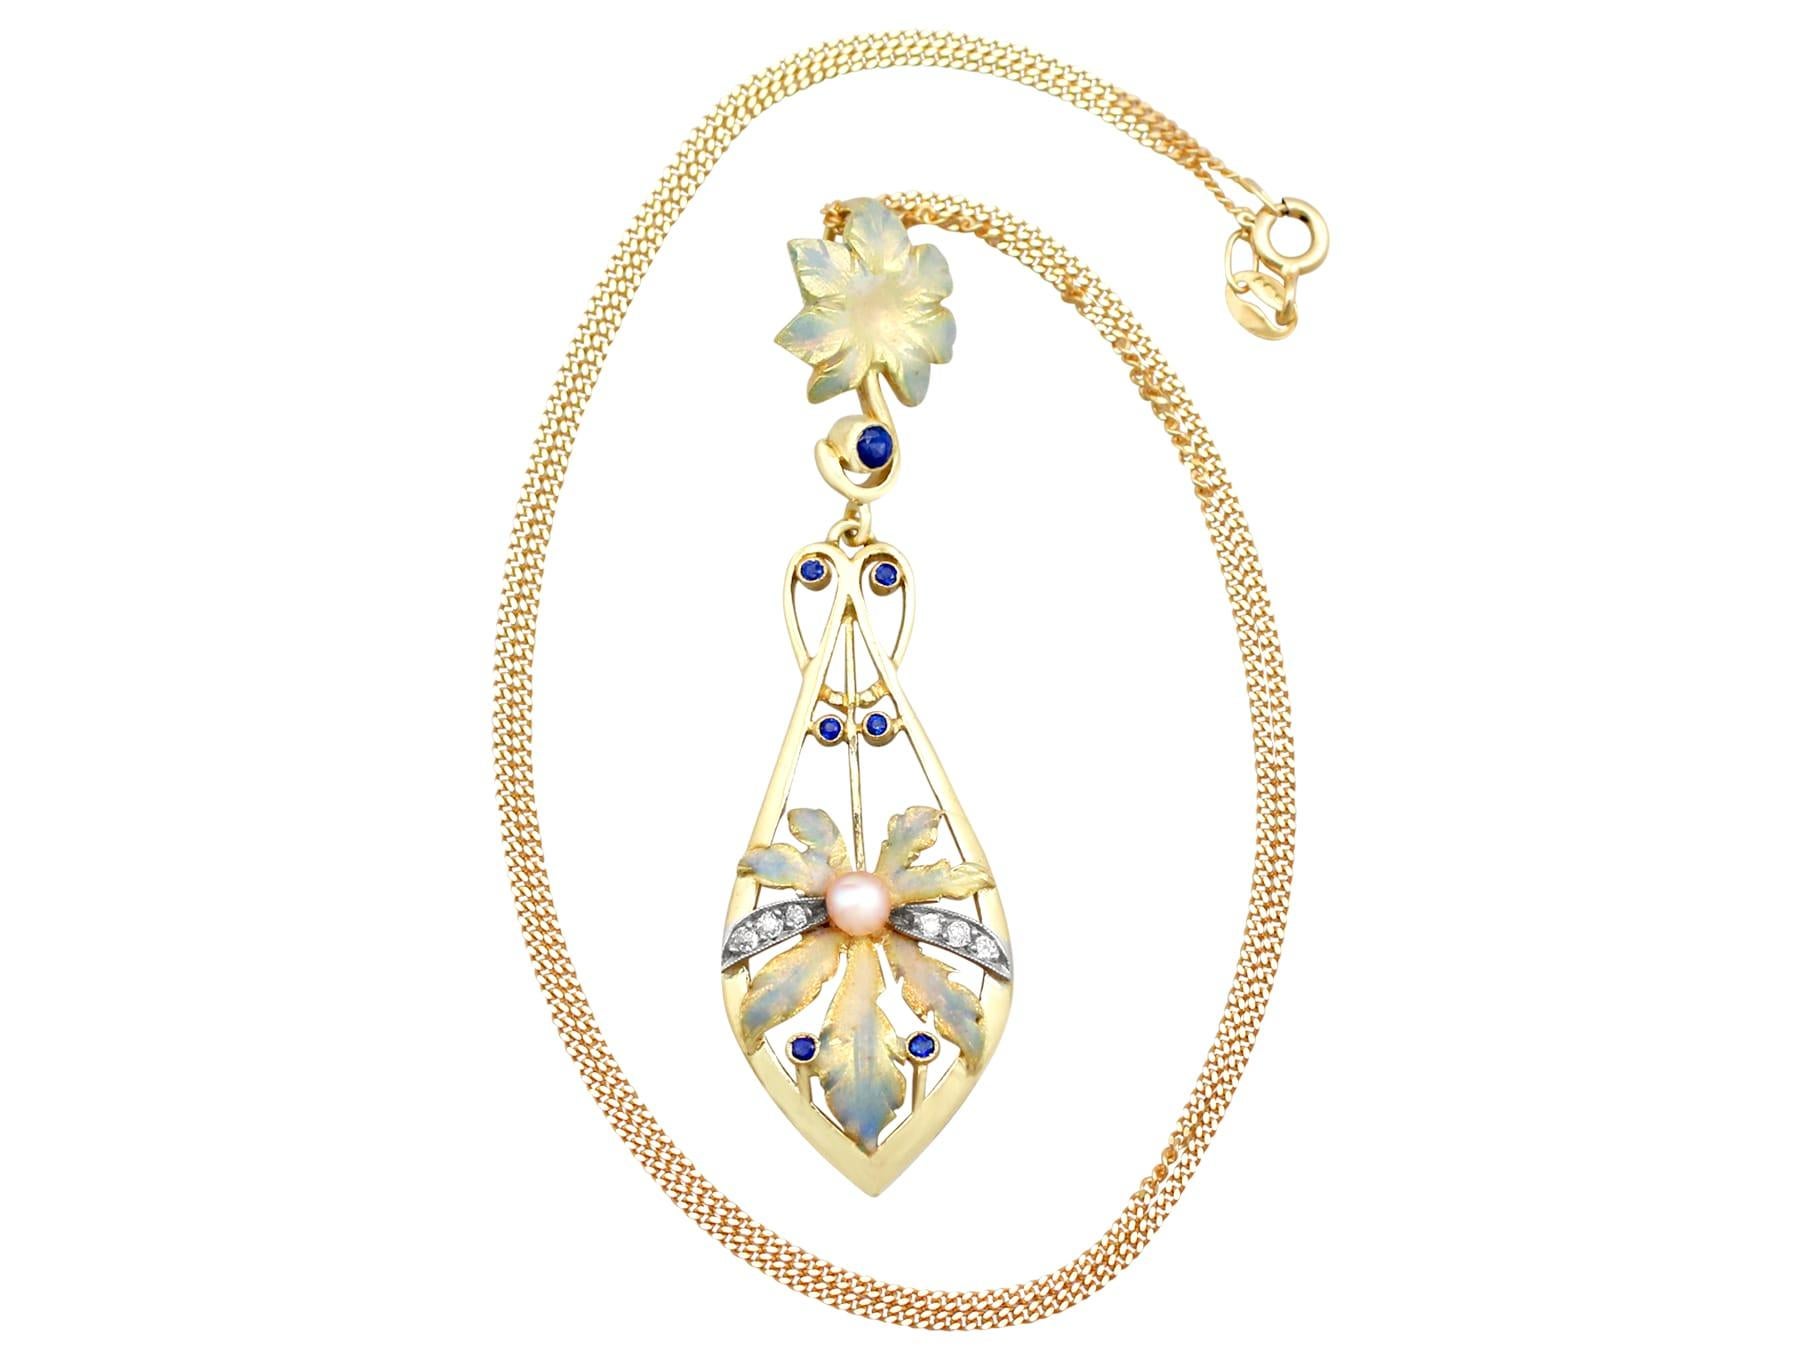 A stunning antique Victorian 0.19 carat sapphire and 0.11 carat diamond, pearl and enamel, 18 karat yellow gold necklace / brooch; part of our diverse antique jewelry and estate jewelry collections.

This stunning, fine and impressive Victorian